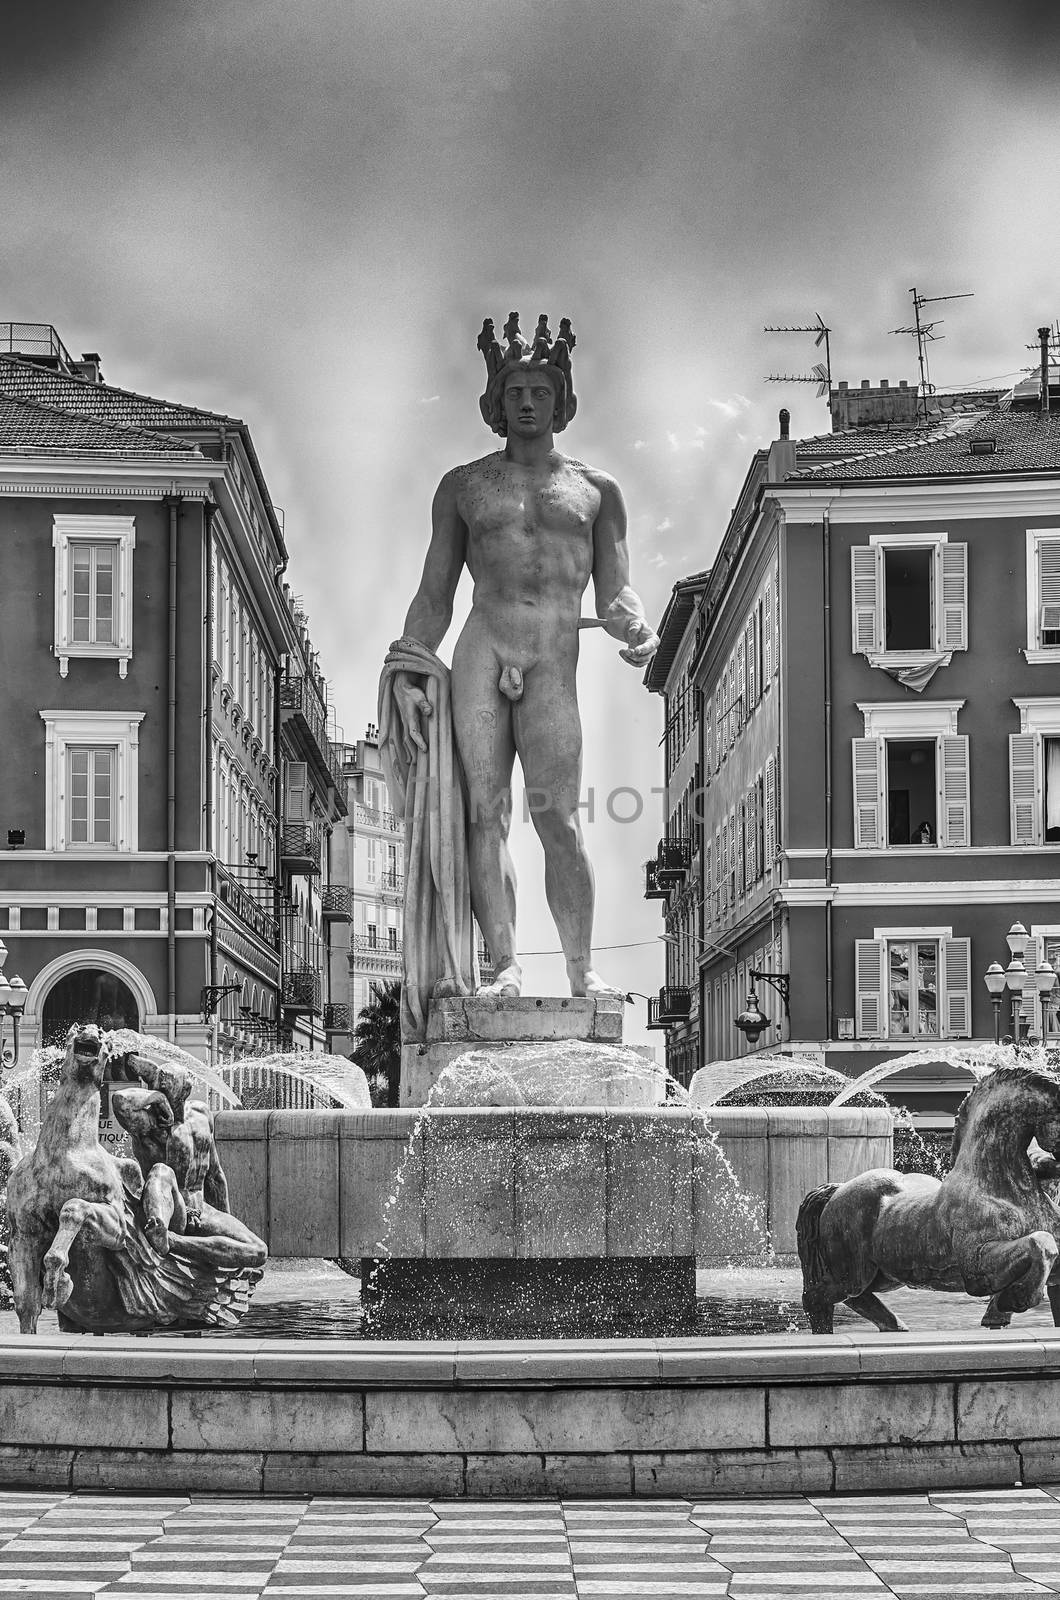 The scenic Fontaine du Soleil with the statue of Apollo in Place Massena, major landmark in Nice, Cote d'Azur, France